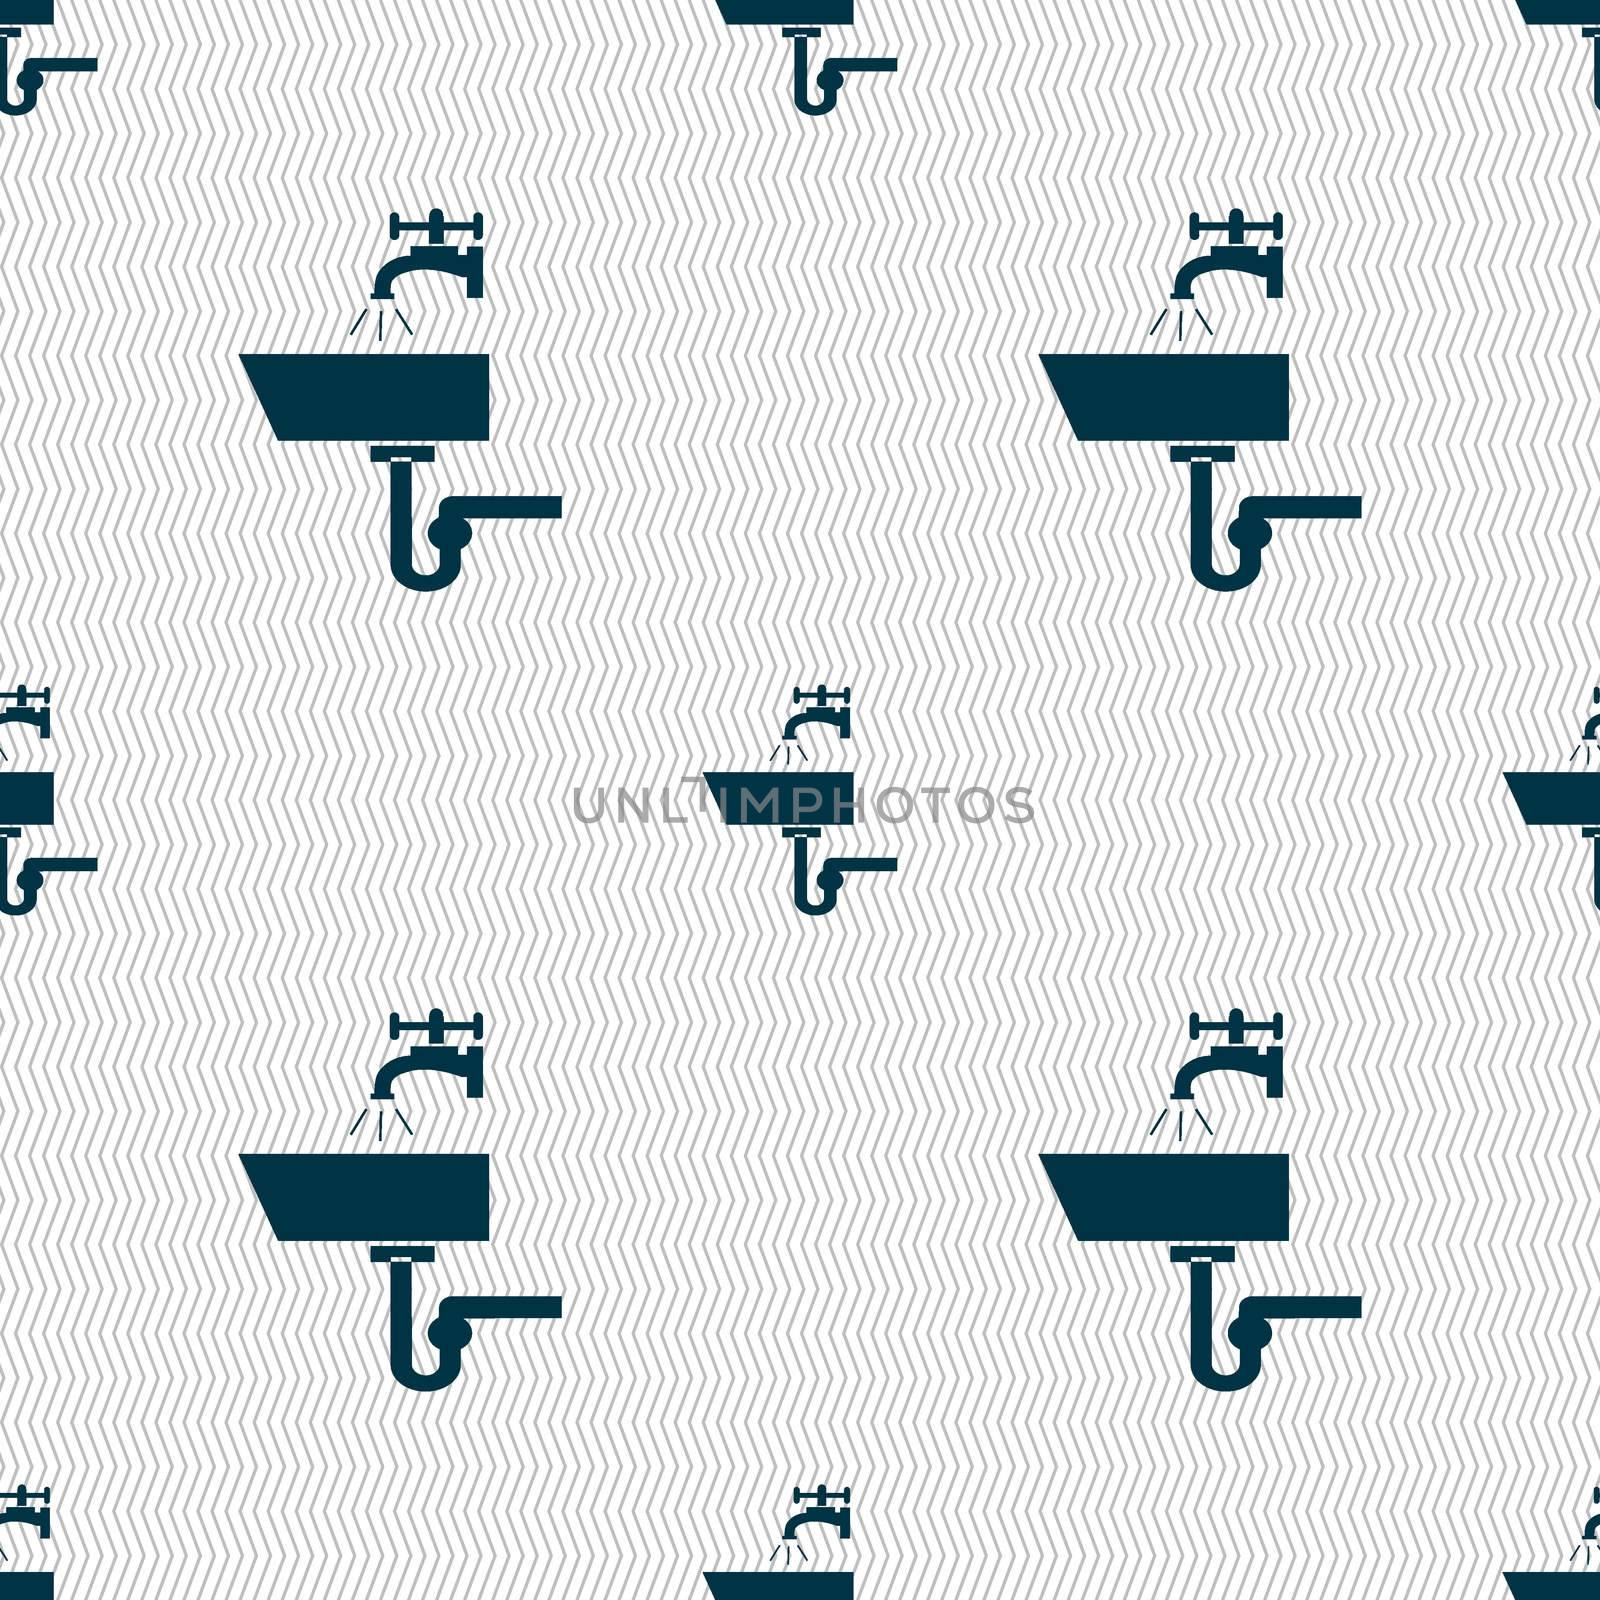 Washbasin icon sign. Seamless abstract background with geometric shapes. illustration